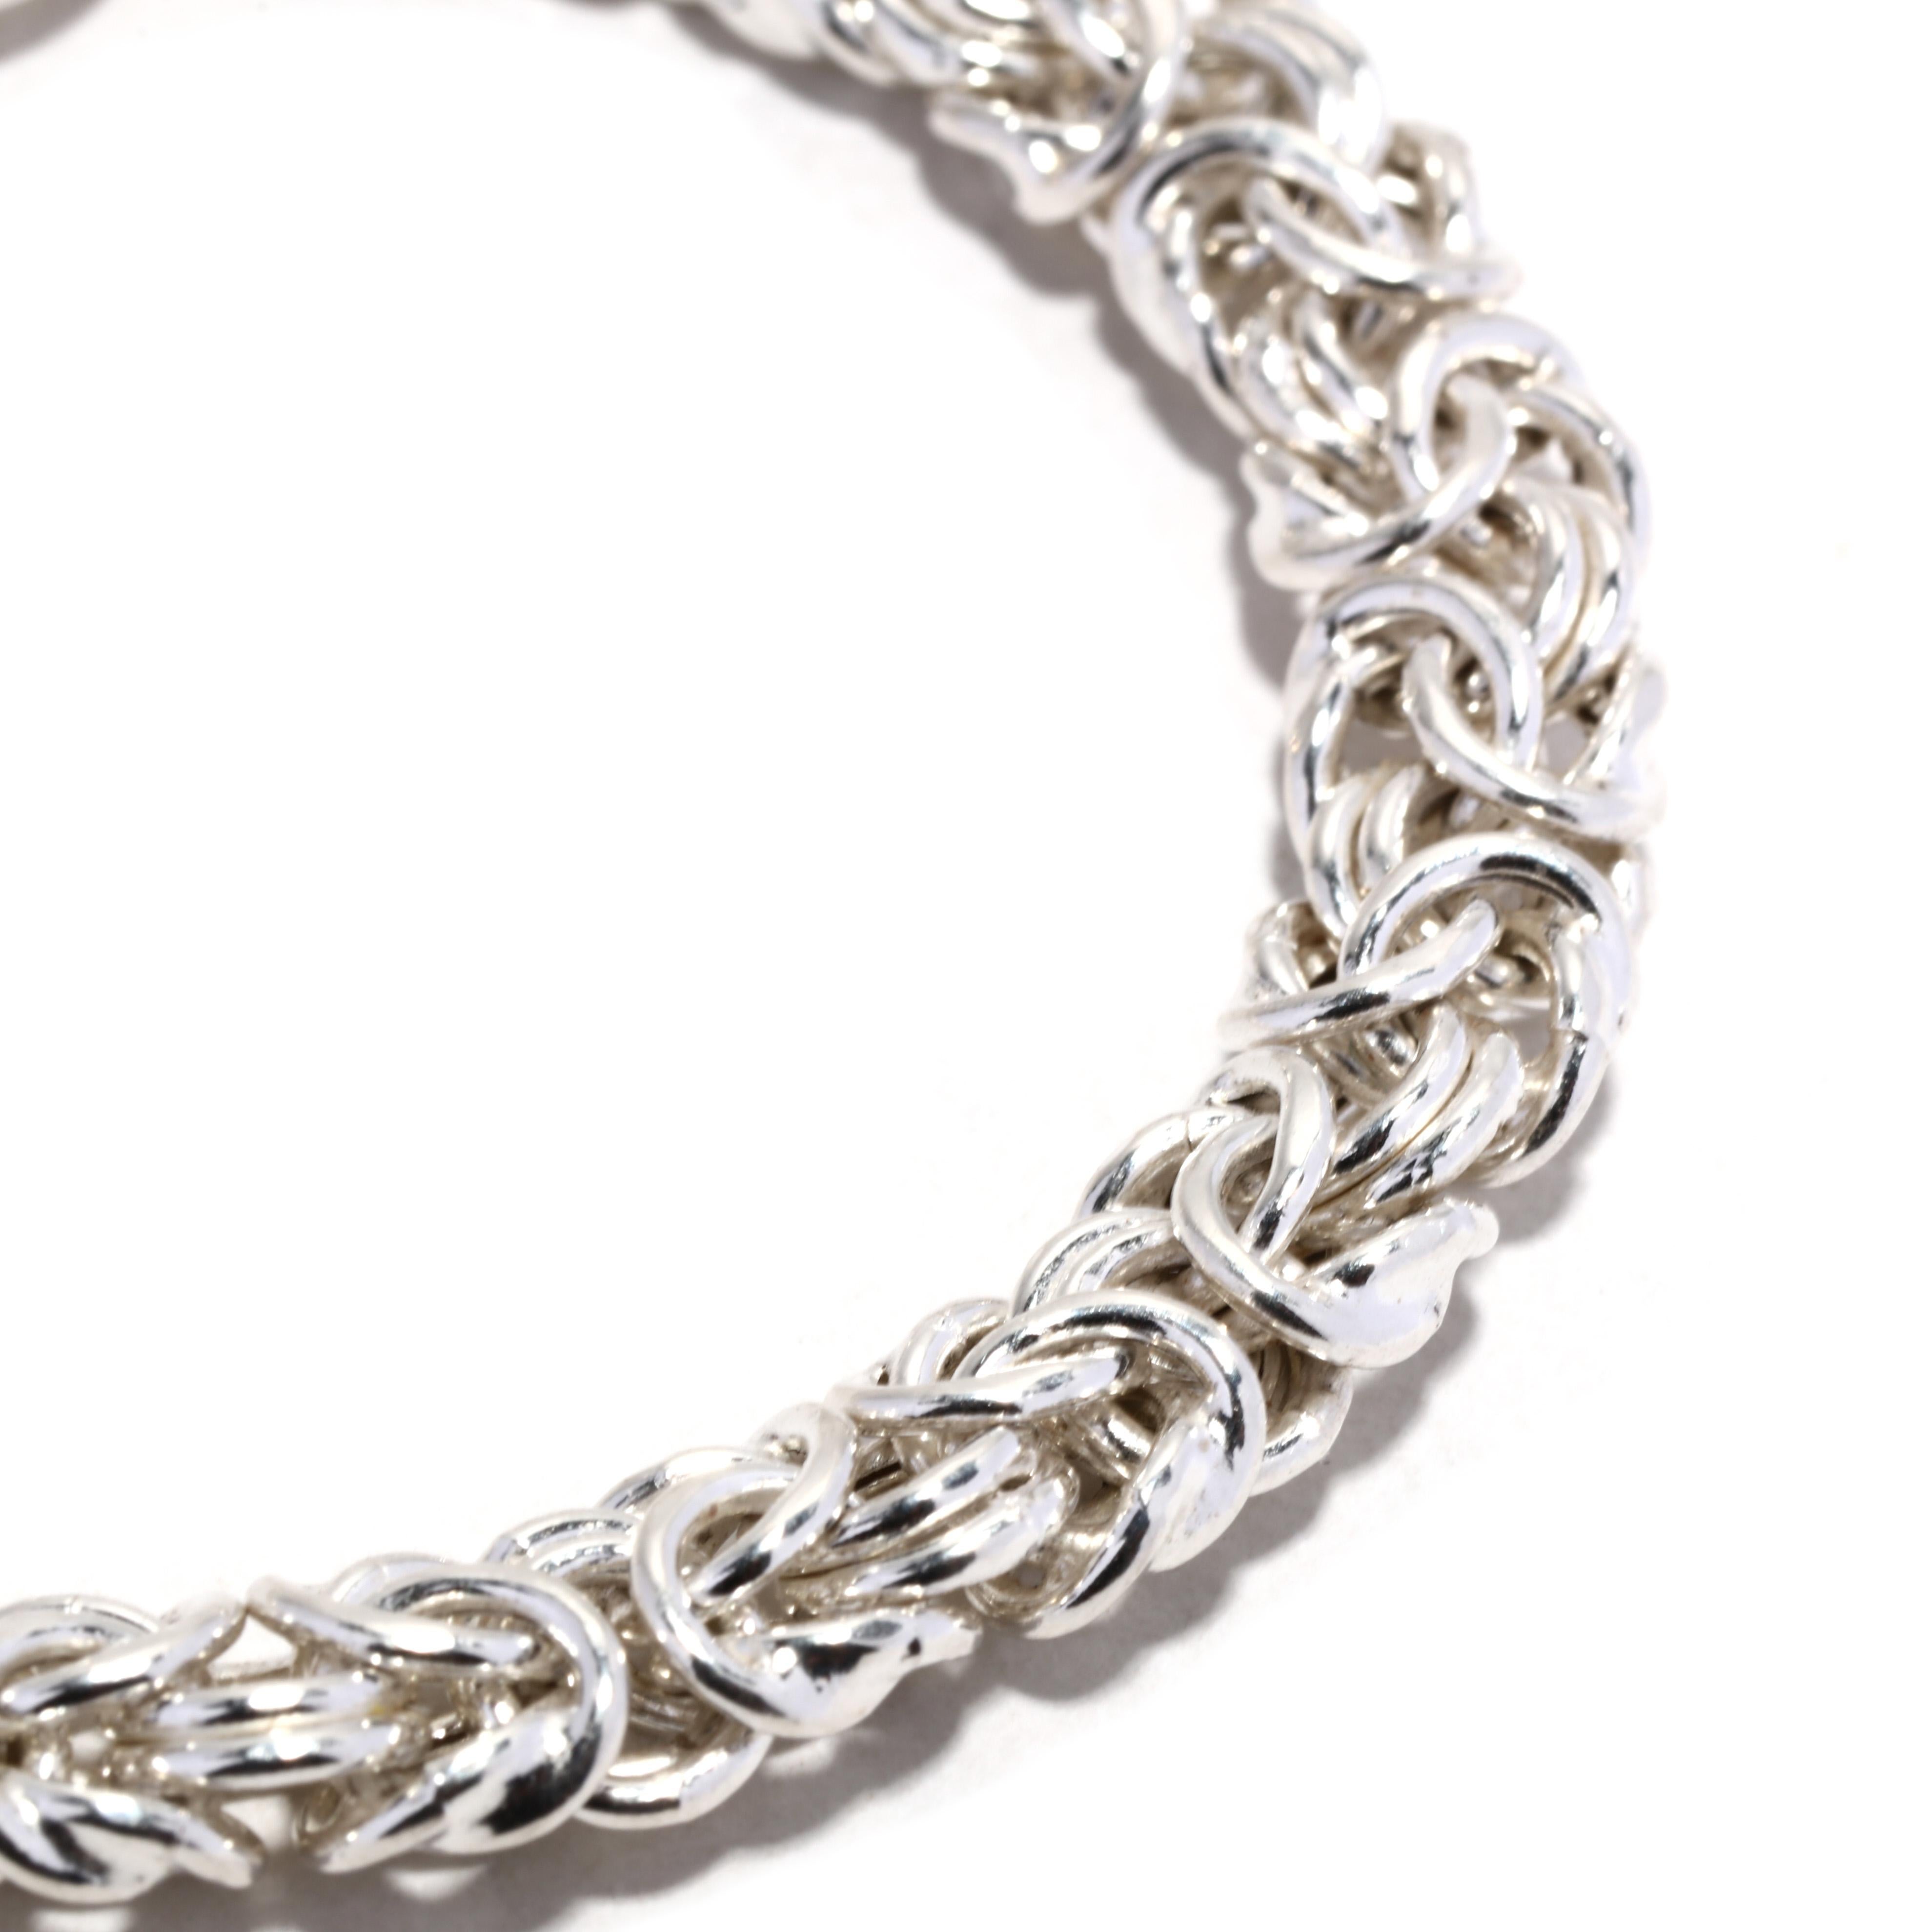 This stunning vintage Italian Byzantine chain bracelet is crafted from sterling silver and features a length of 7.25 inches. Its intricately linked chain pattern adds a beautiful, timeless touch to any wardrobe. With its classic Italian silver